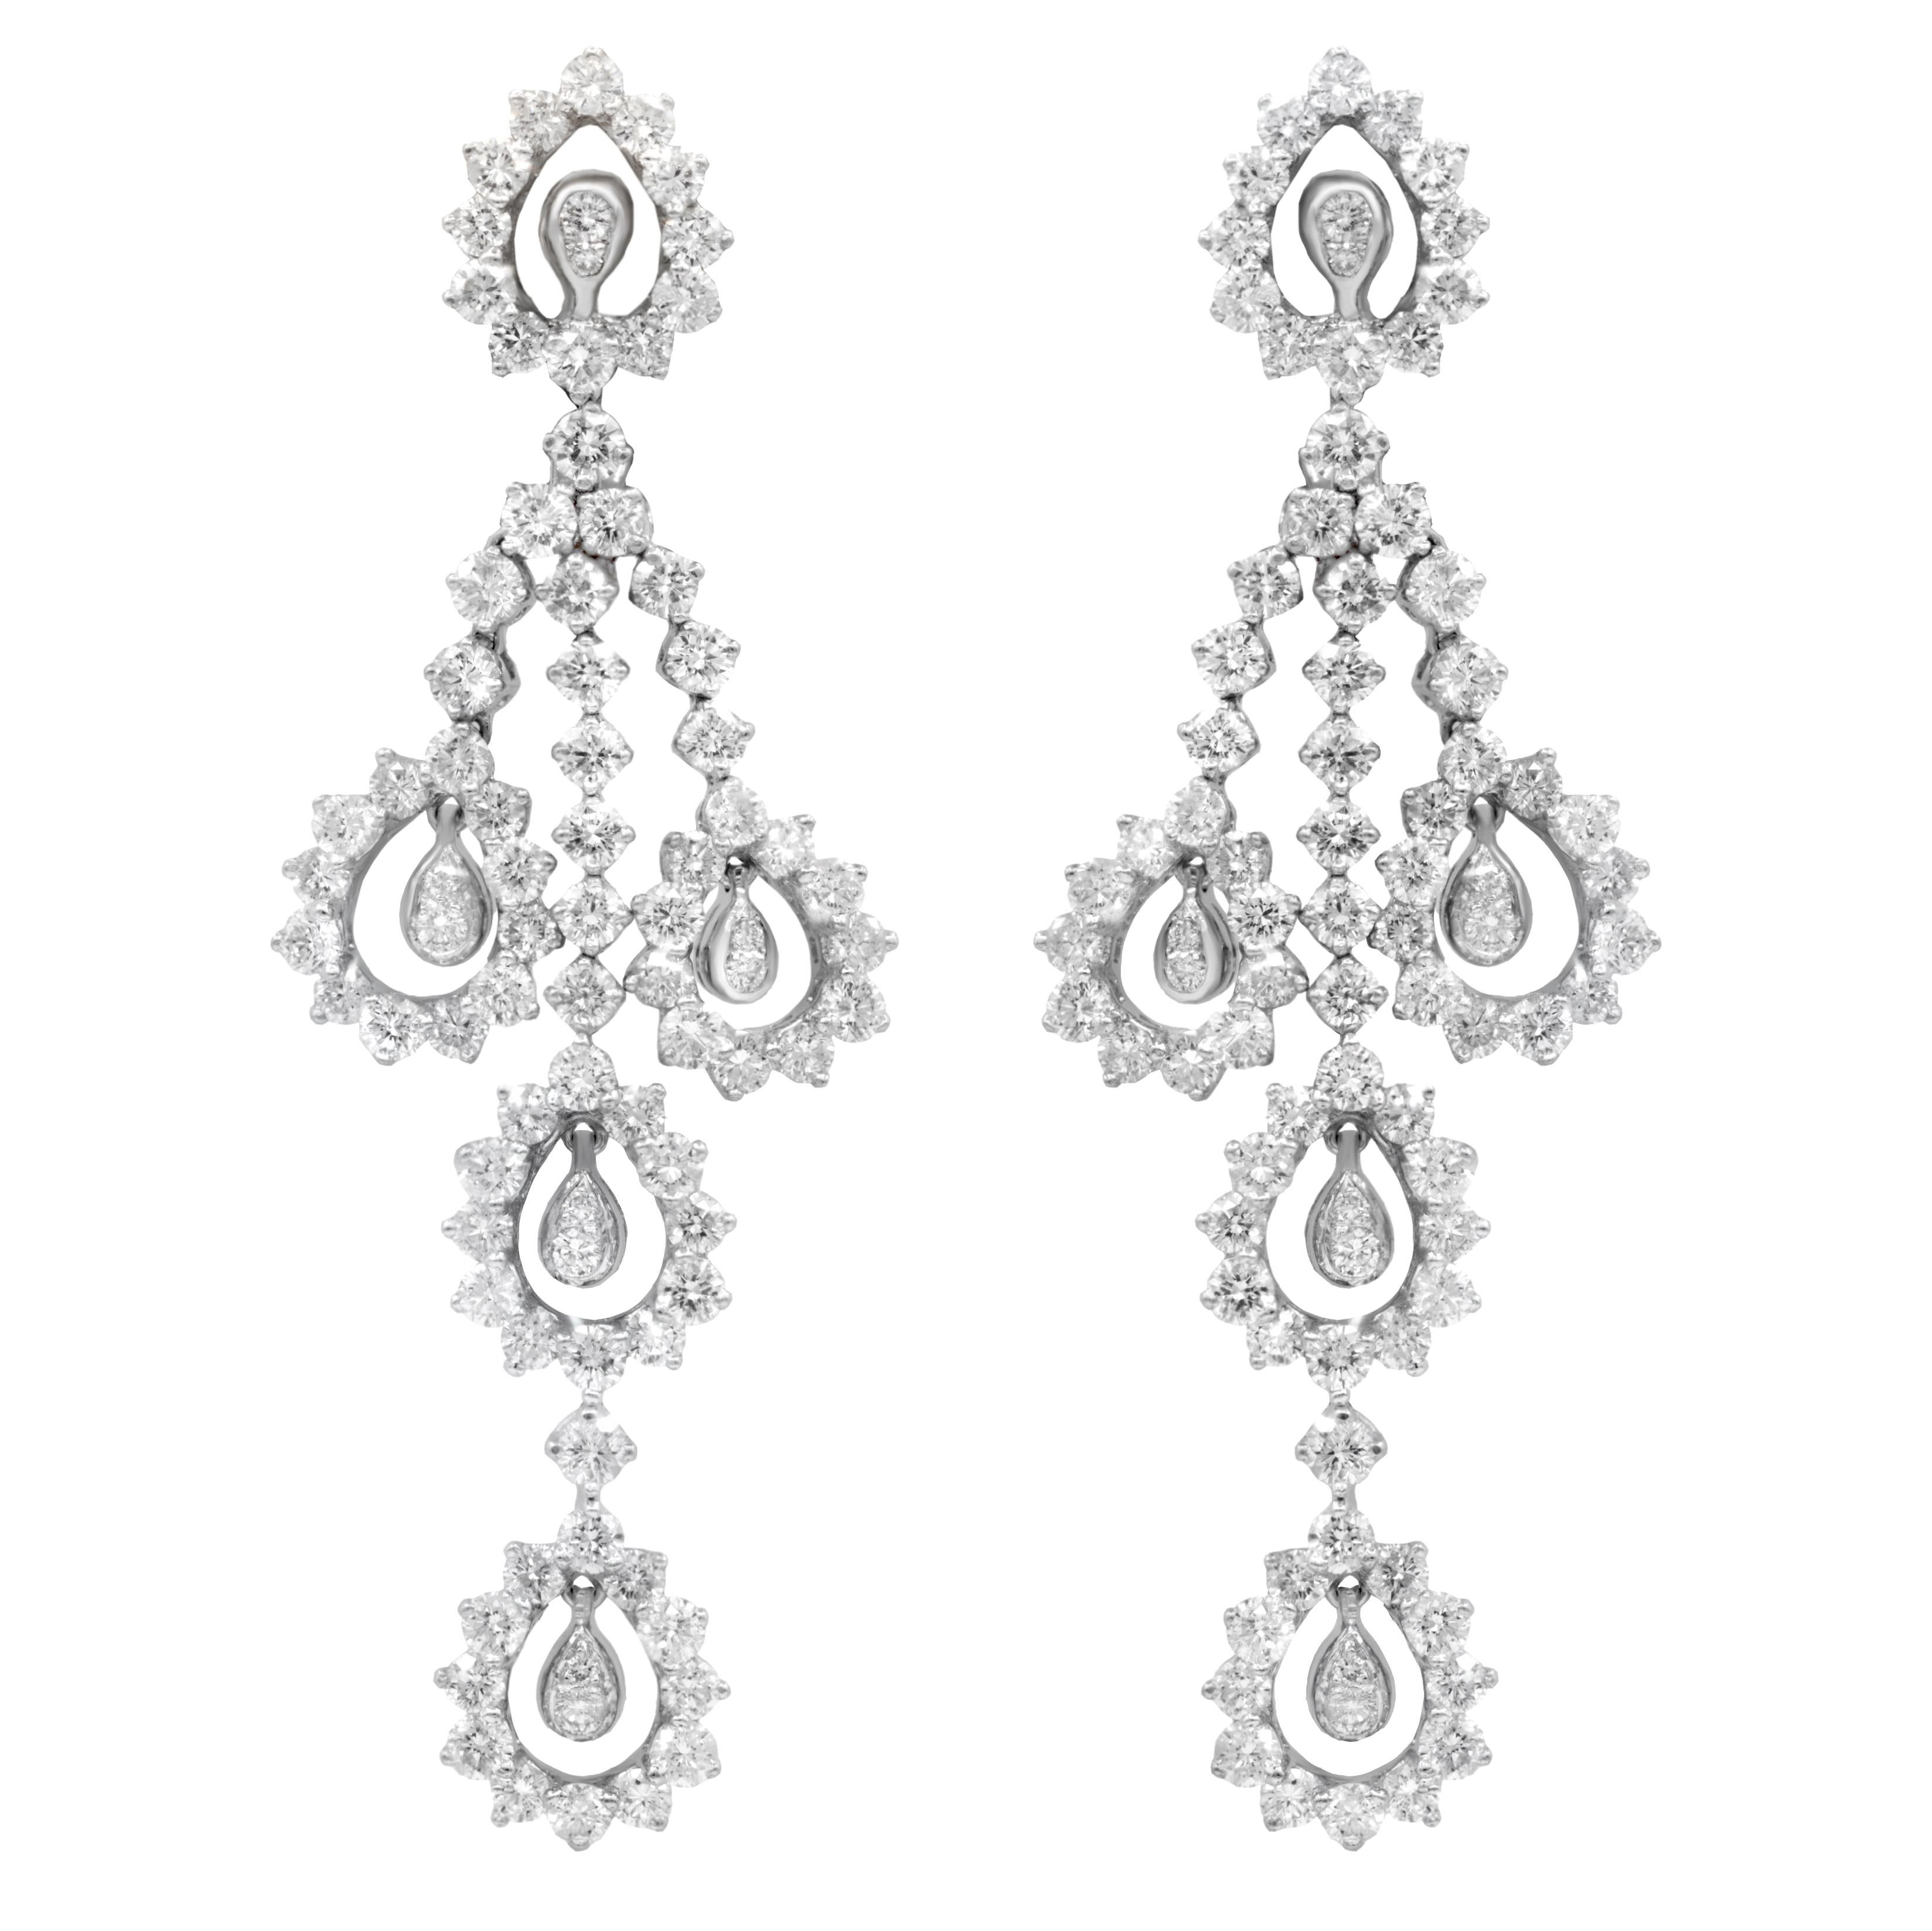 18K White Gold Diamond Earrings featuring 5.50 Carats of Diamonds

Underline your look with this sharp 18K White gold shape Diamond Earrings. High quality Diamonds. This Earrings will underline your exquisite look for any occasion.

. is a leading